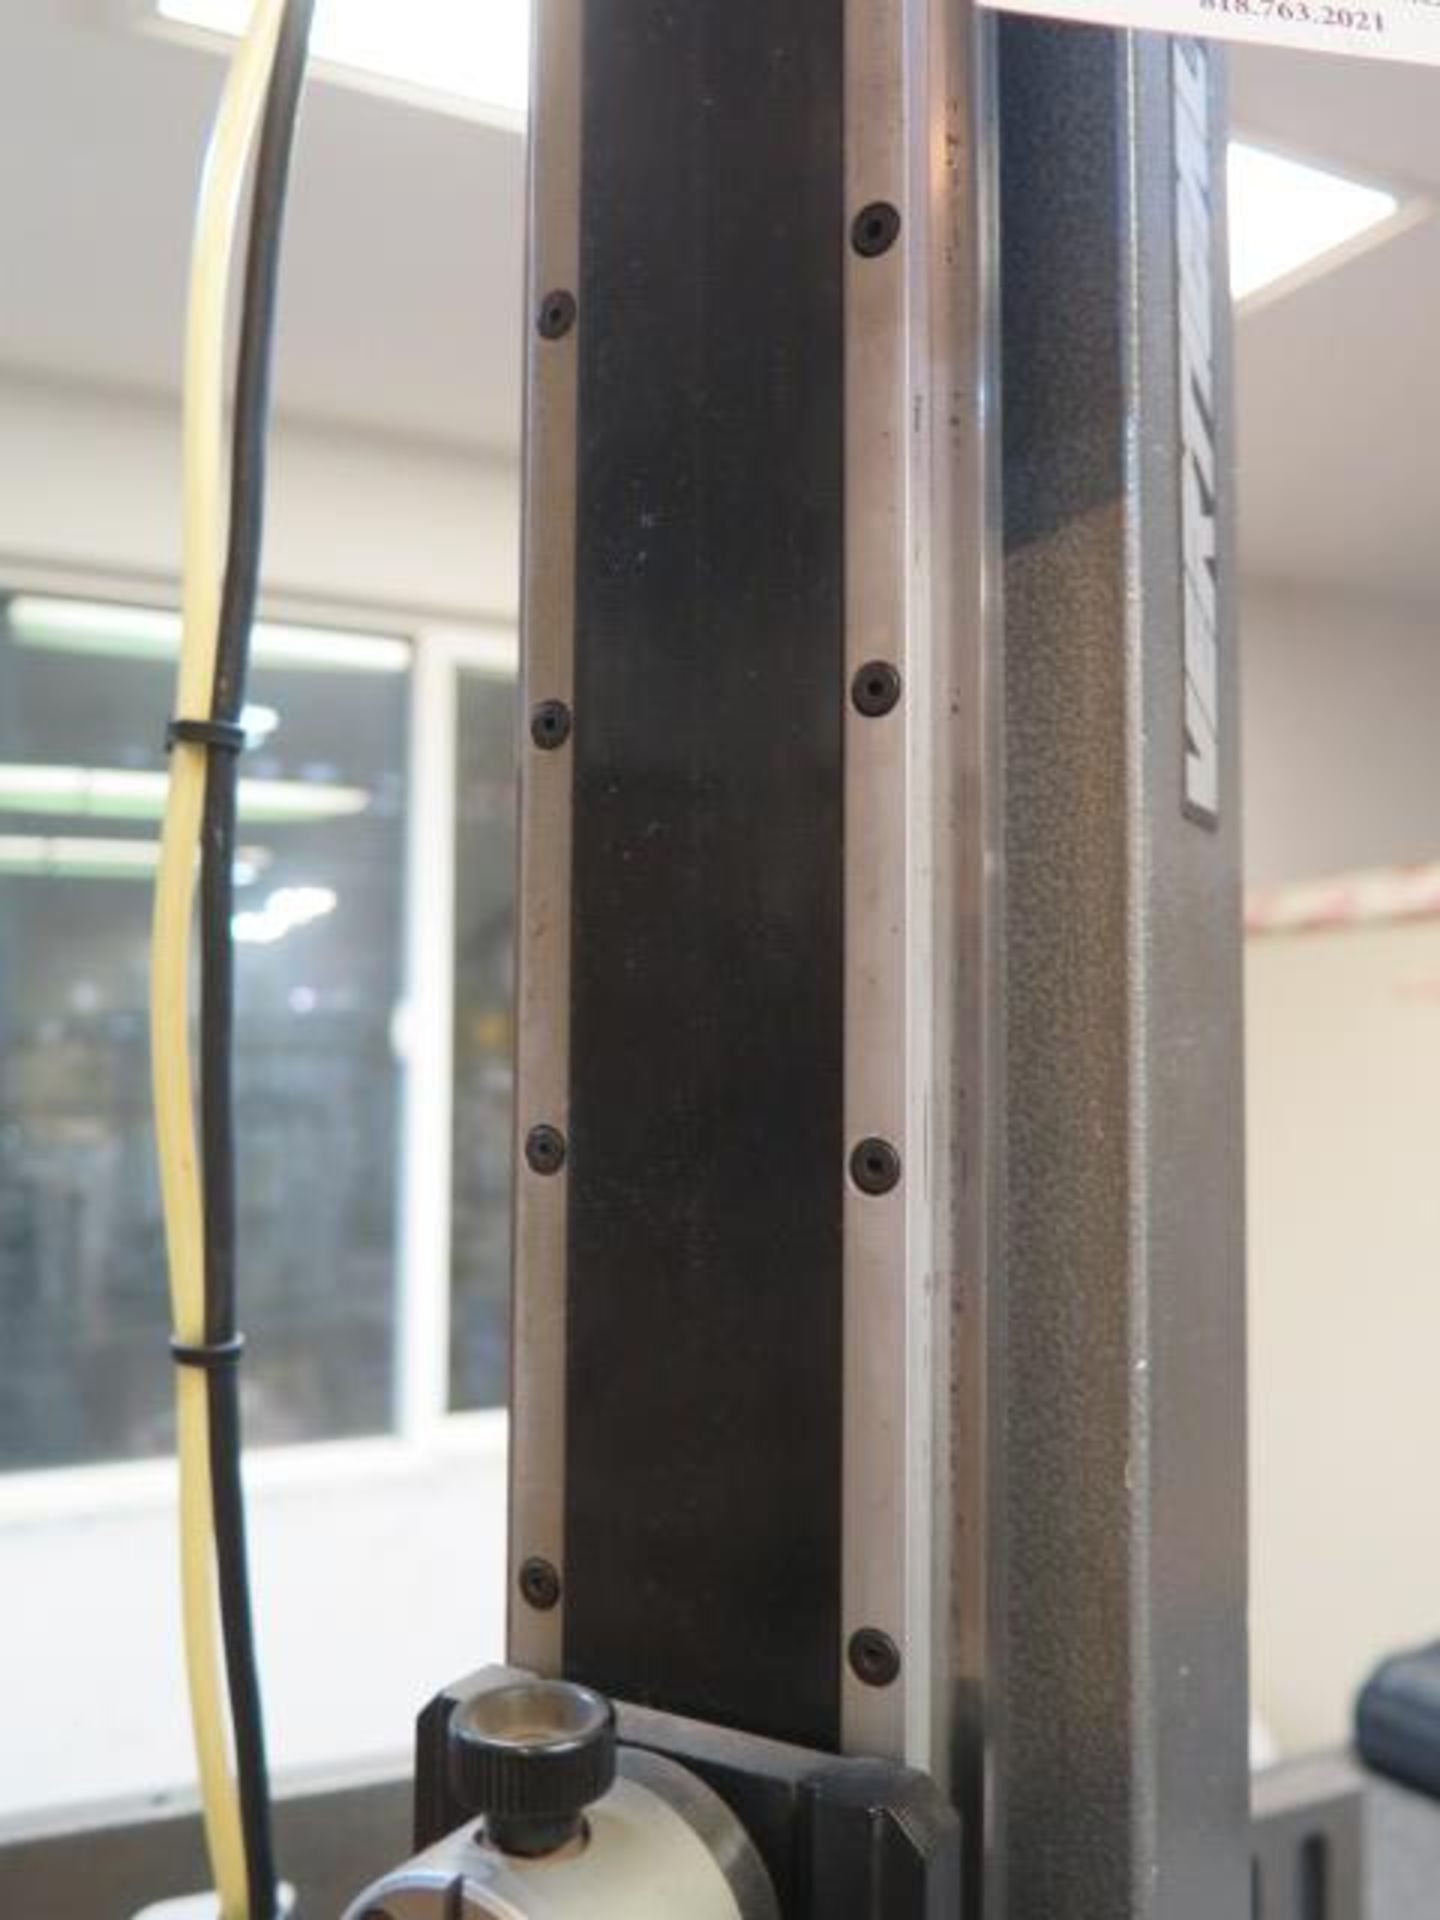 Fowler Trimos "Vertical" 18" Digital Height Gage (SOLD AS-IS - NO WARRANTY) - Image 8 of 13